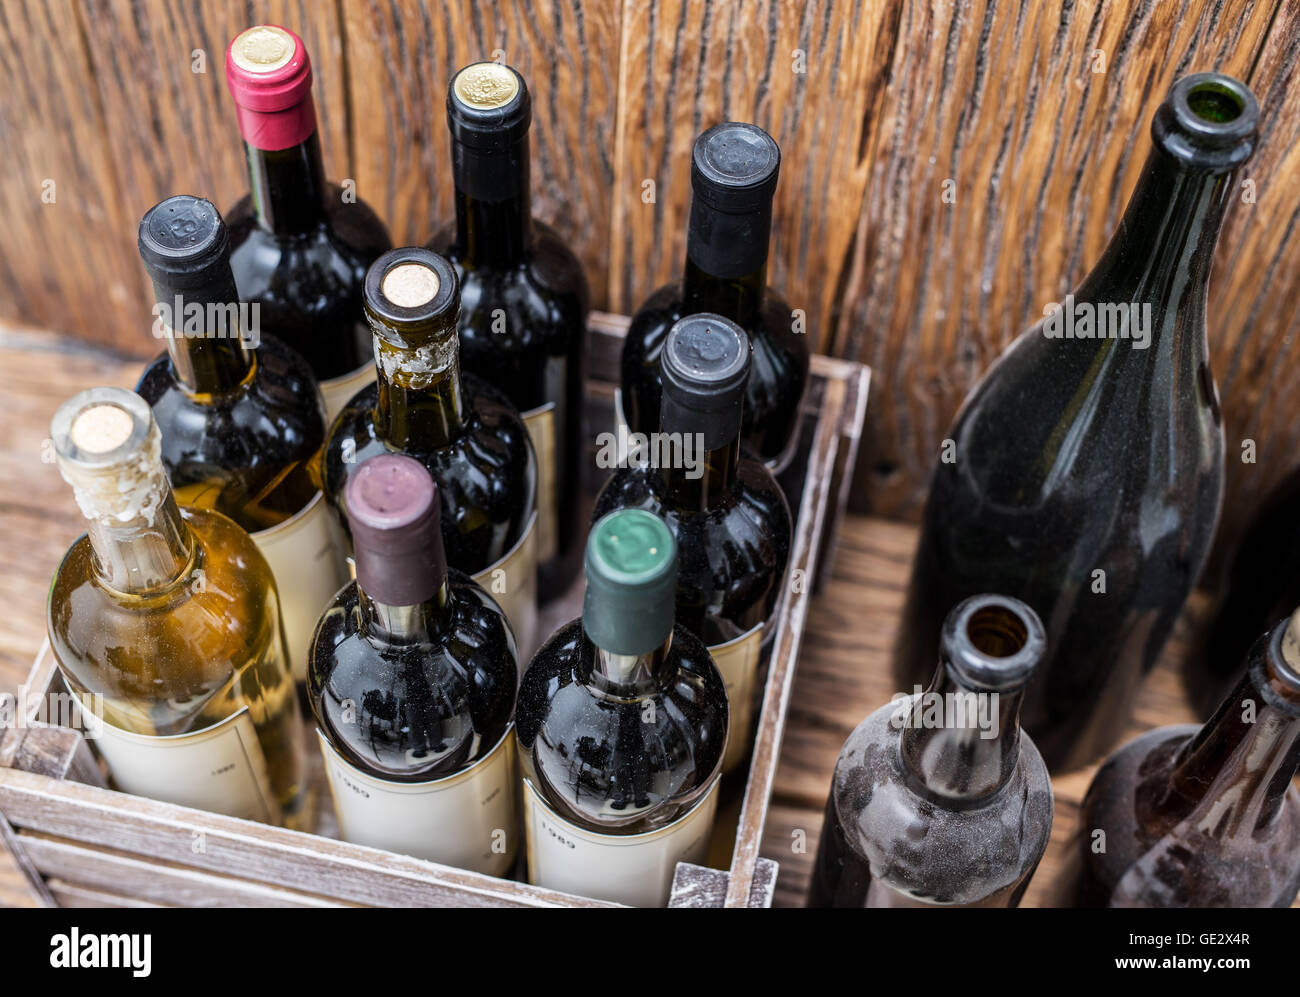 Old wine bottles in a wooden crate. Stock Photo